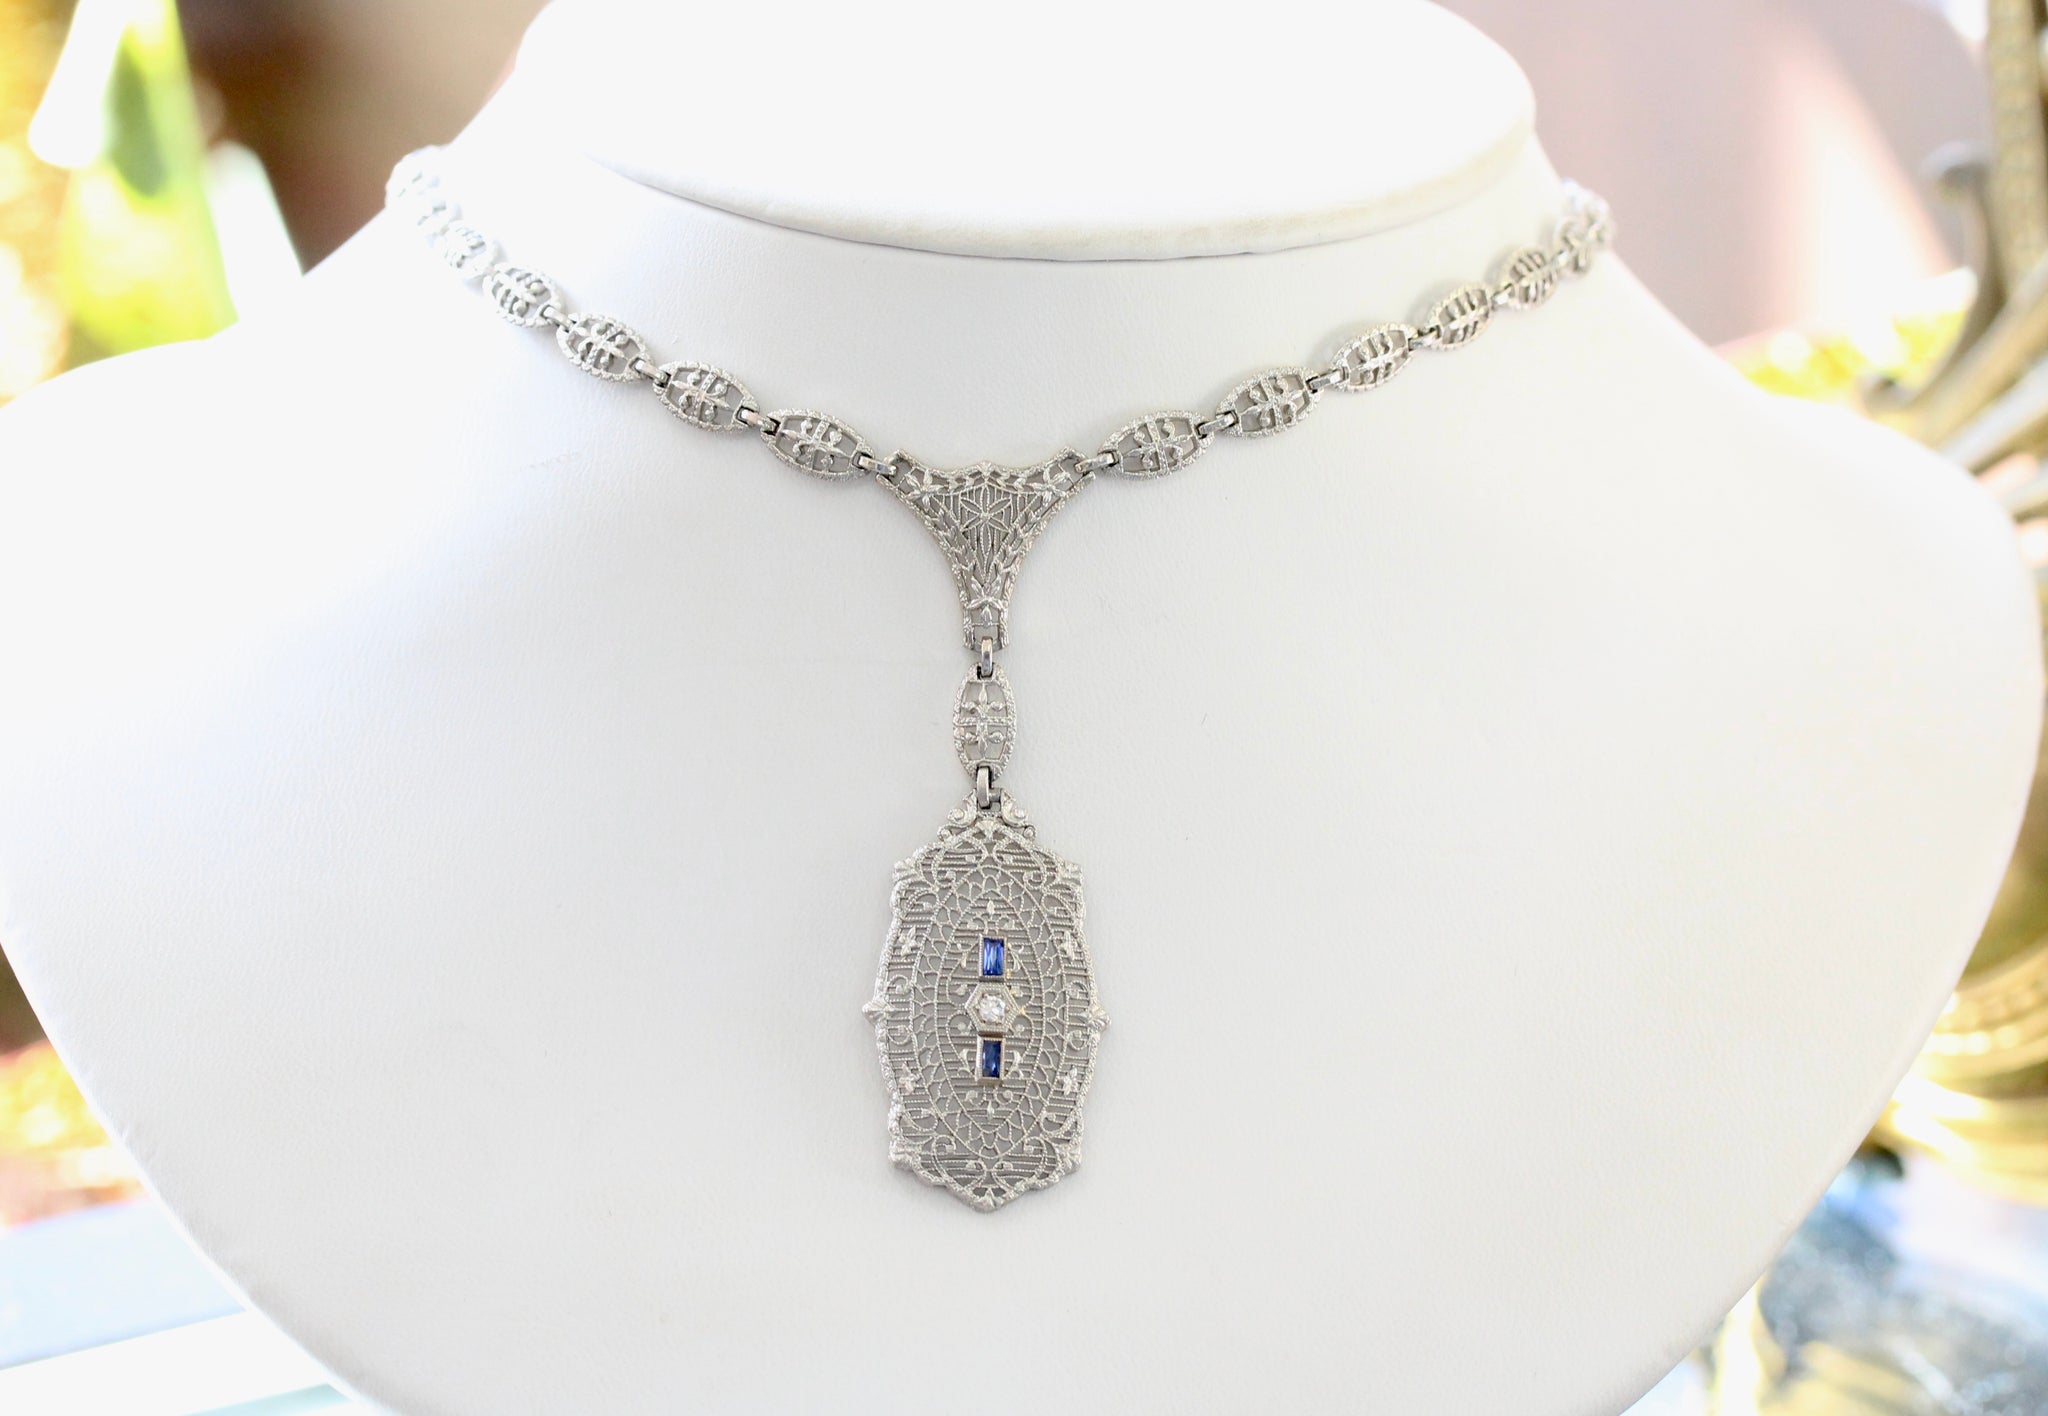 Art Deco Diamond Necklace - Smith and Bevill Jewelers